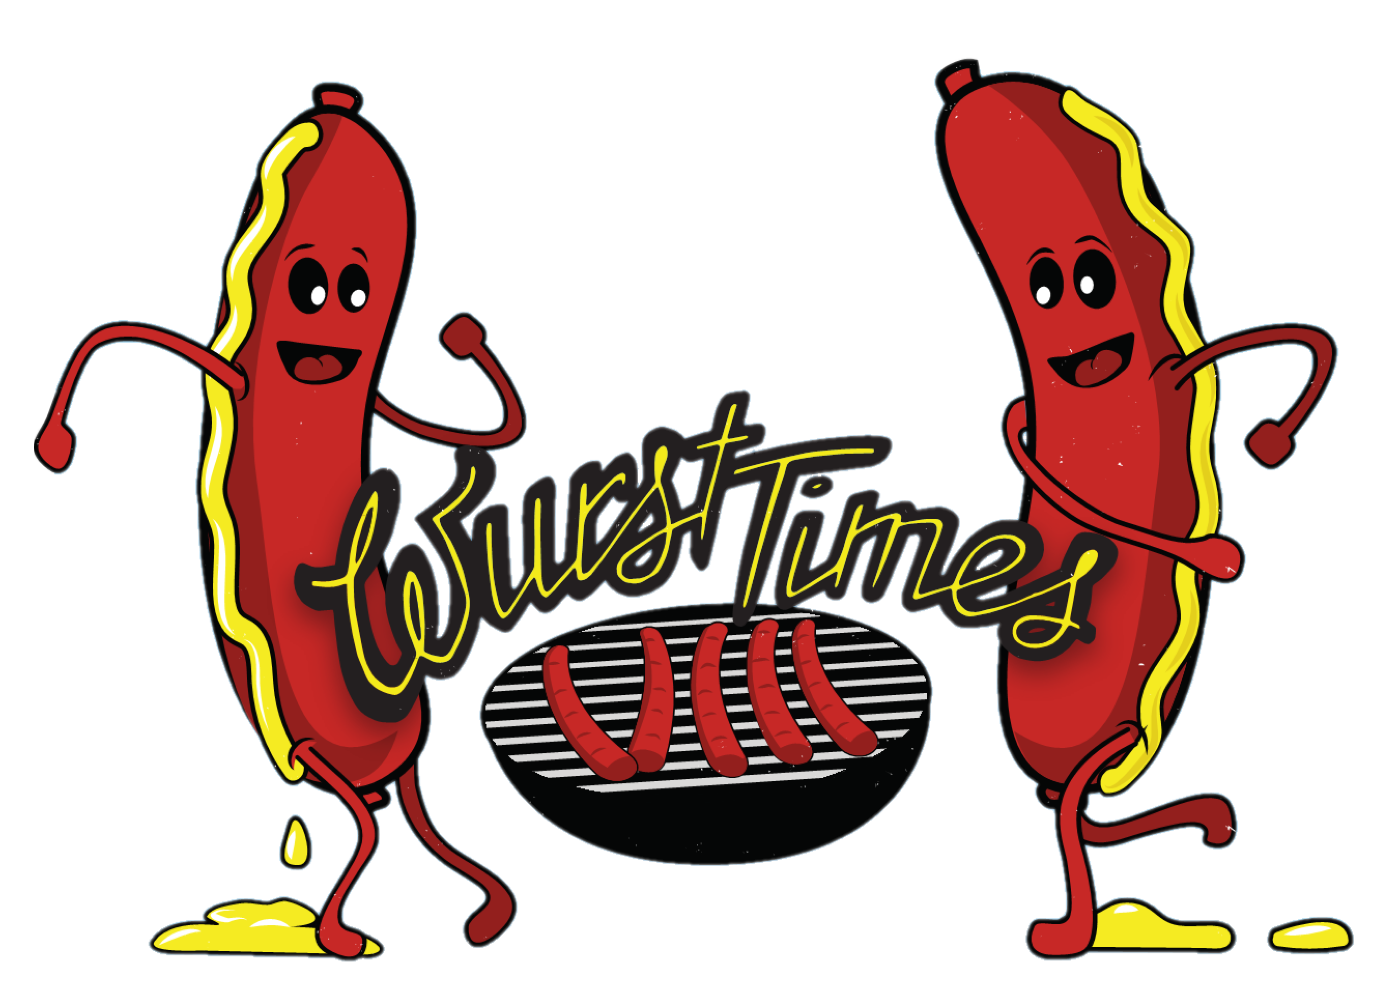 The Wurst Times Festival